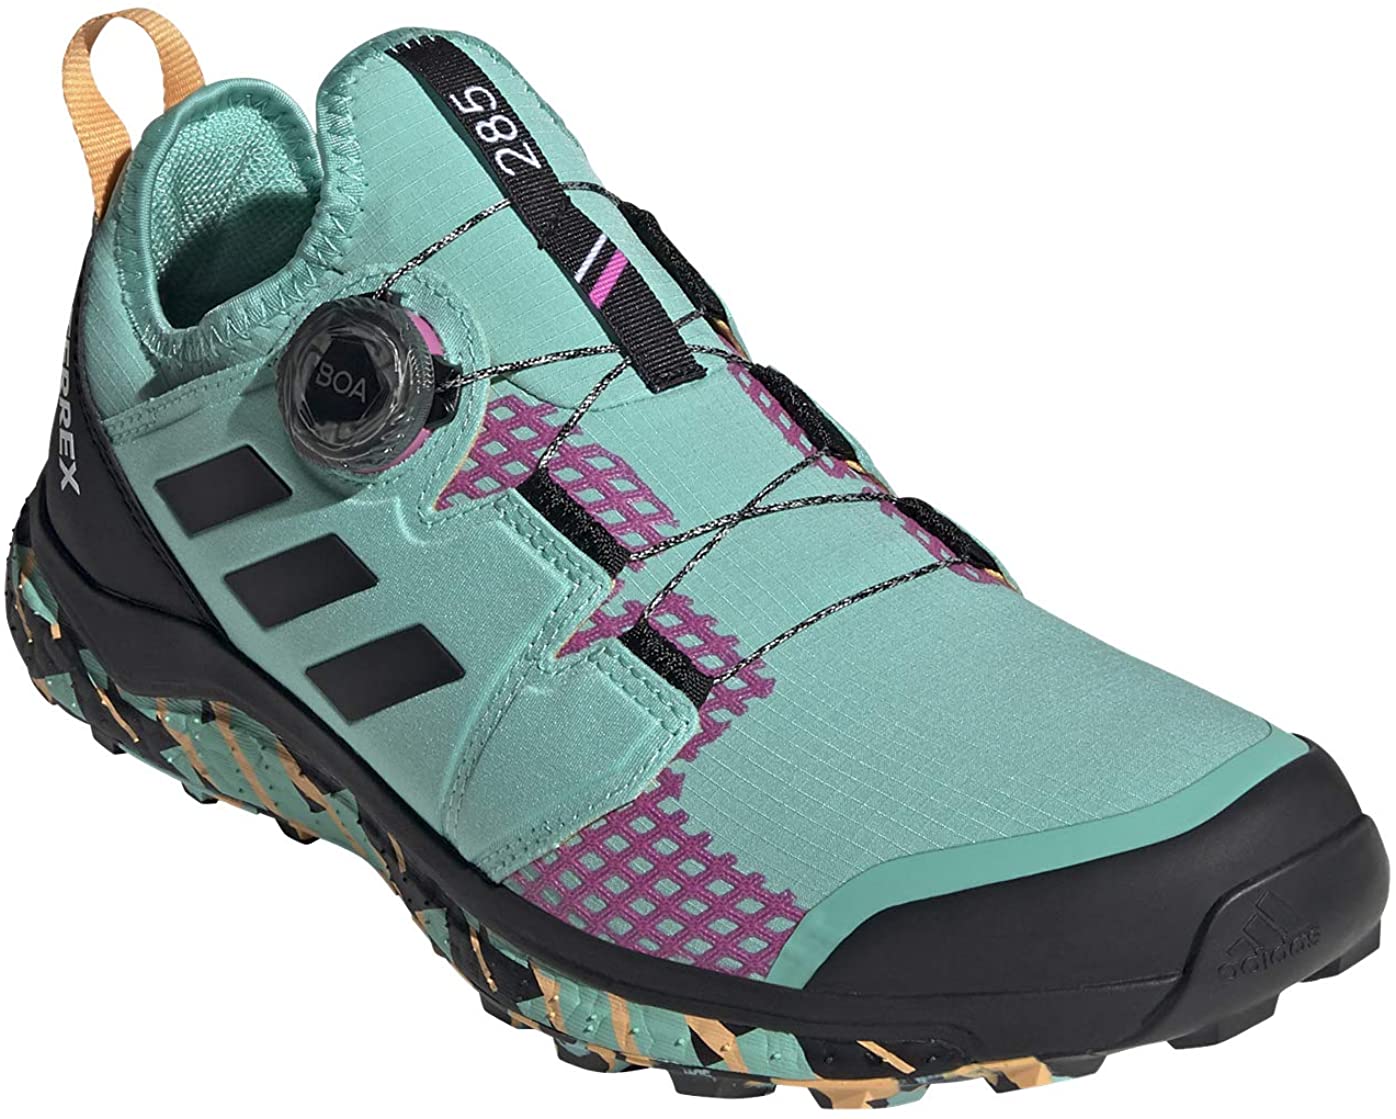 Men's adidas Terrex Agravic BOA Trail Running Shoe in Acimin/Cblack/Scrpnk from the side